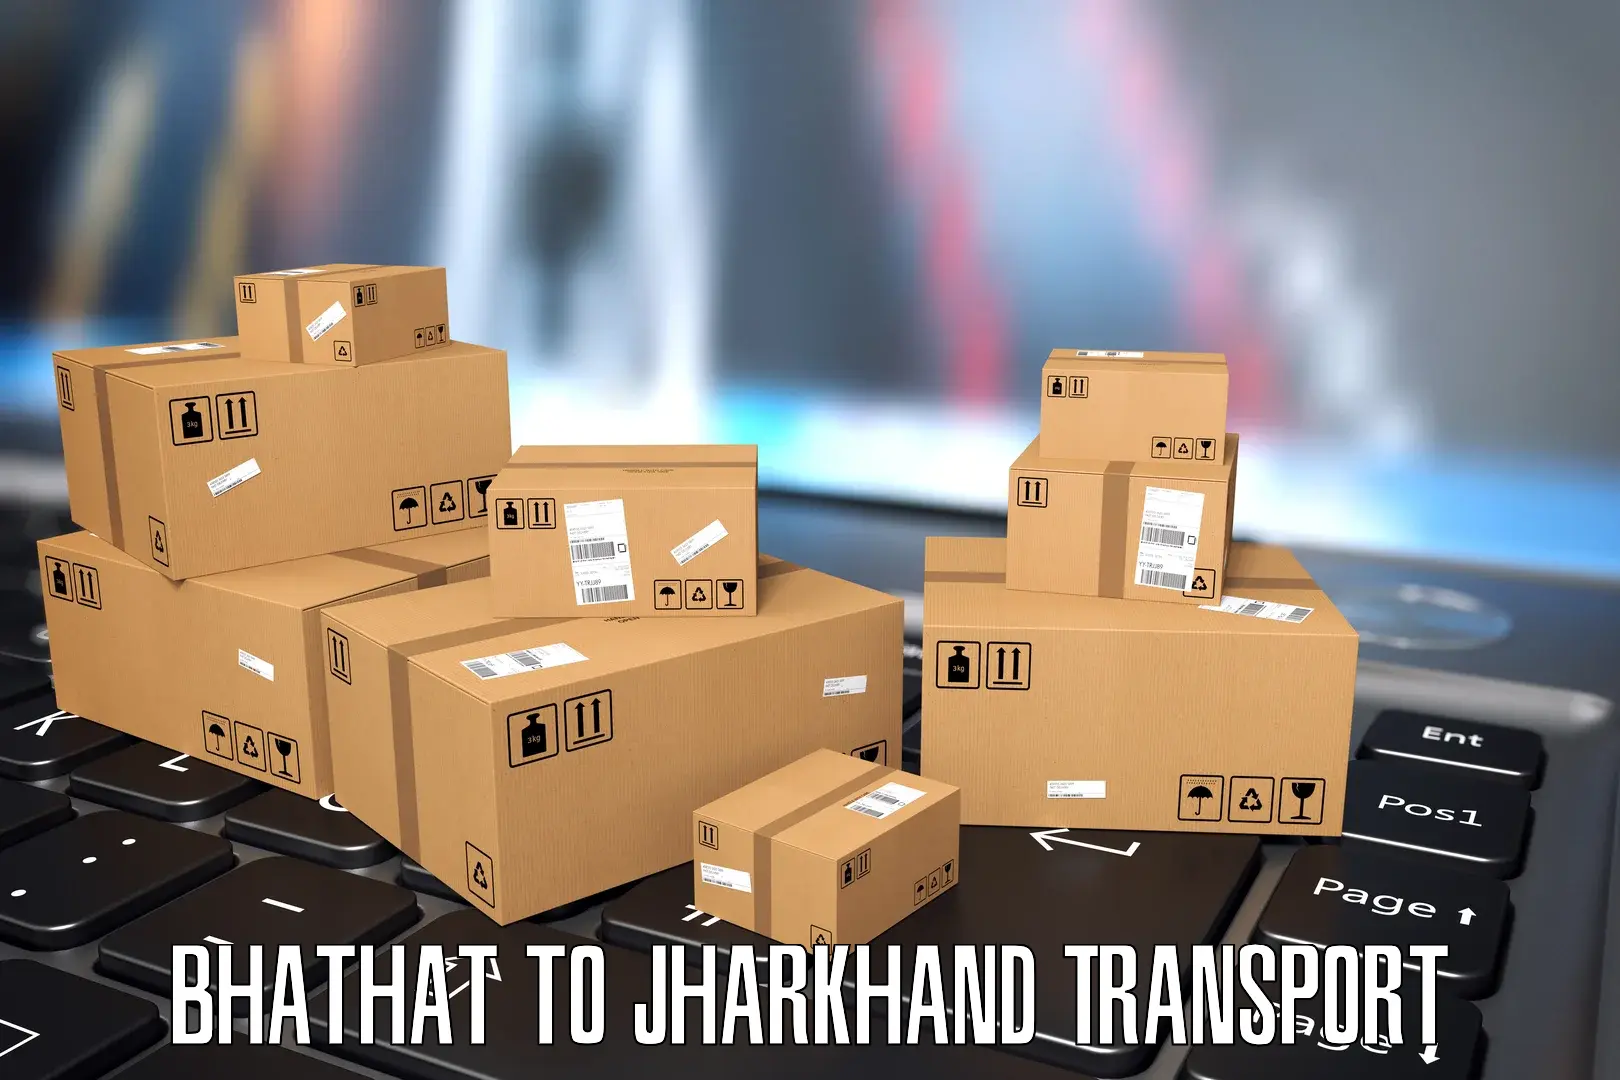 Parcel transport services Bhathat to Ormanjhi